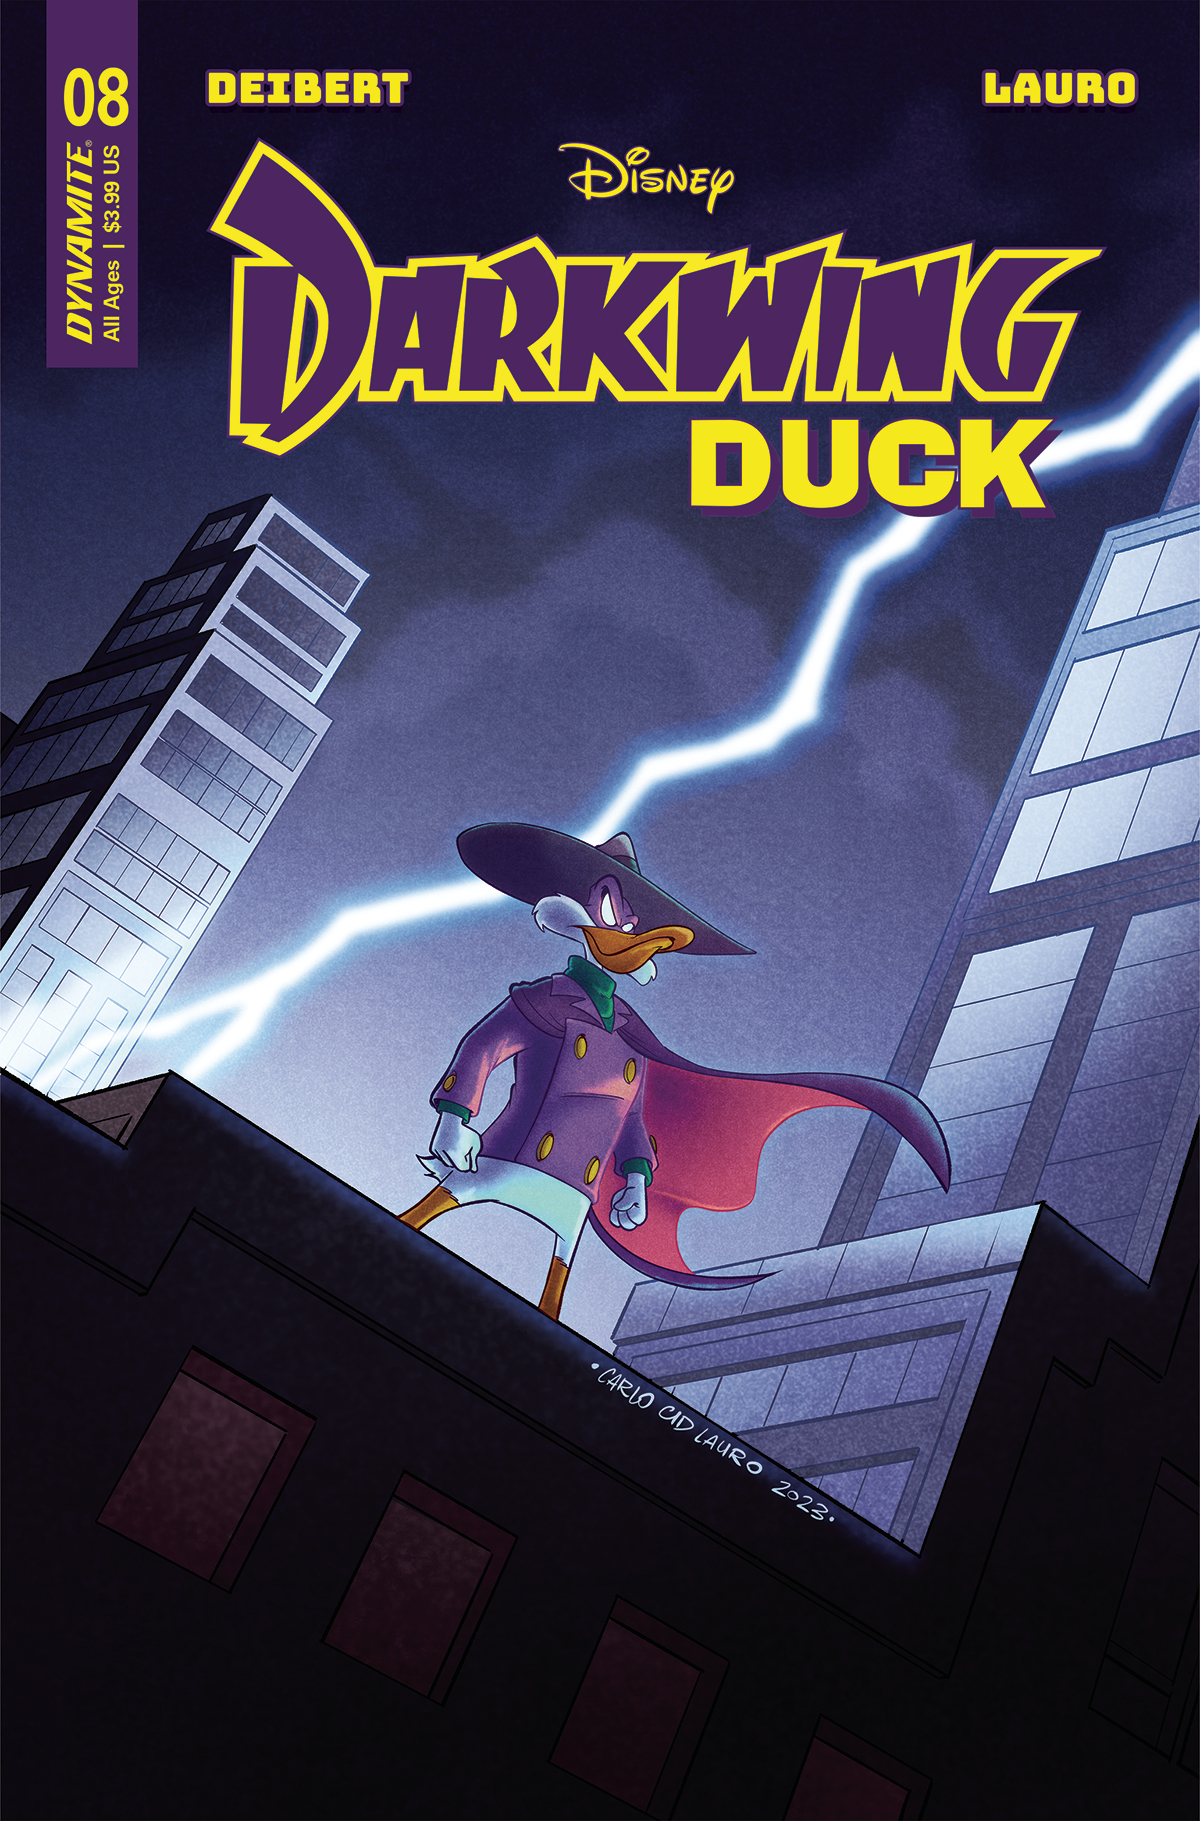 Darkwing Duck #8 Cover F 1 for 10 Incentive Lauro Original